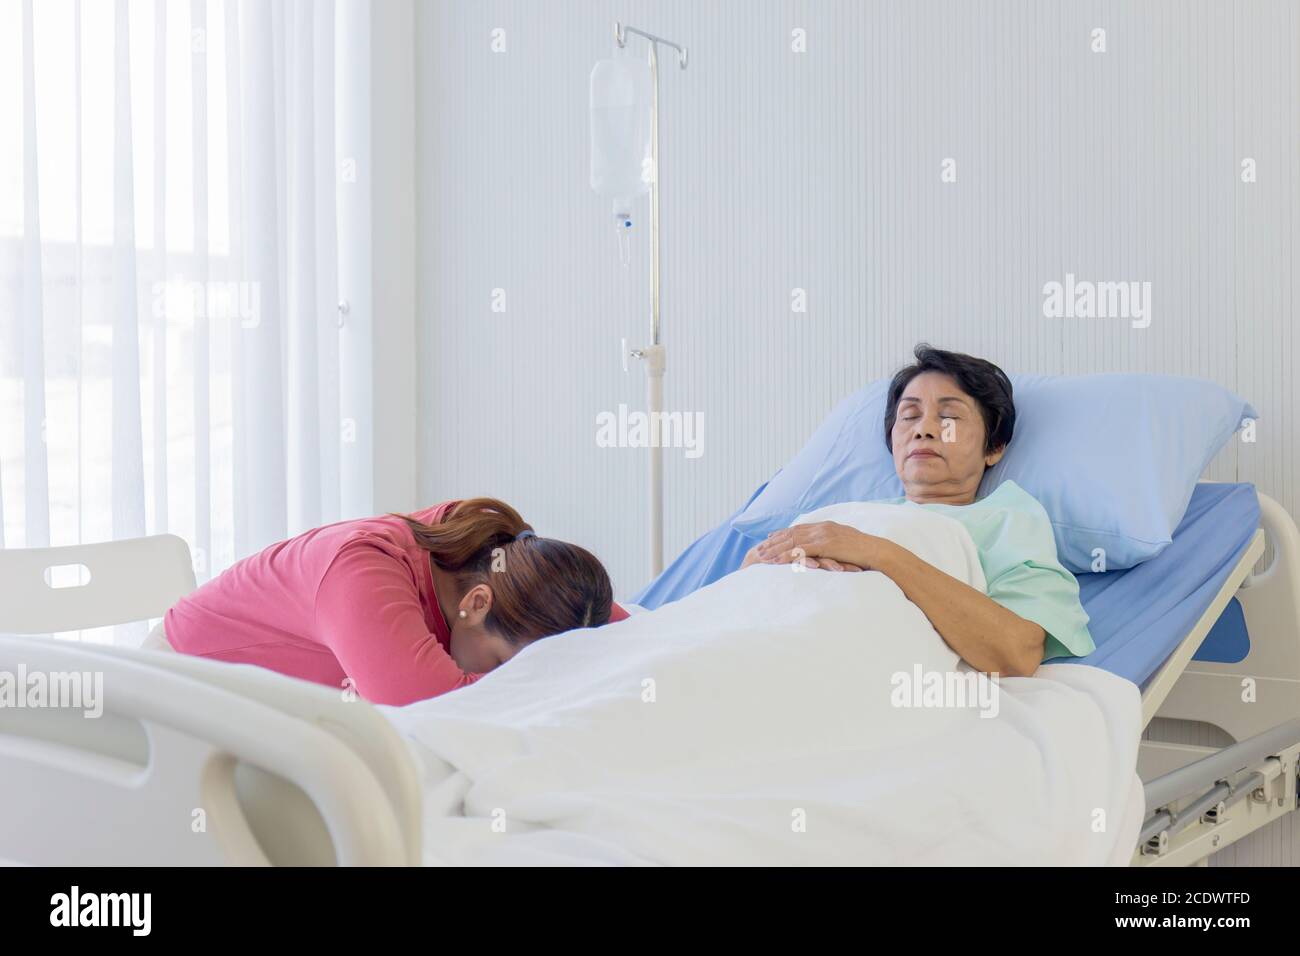 An elderly Asian woman is sick and sleeps in the bed next to Her daughter slept in the care of her hospital bed. Stock Photo